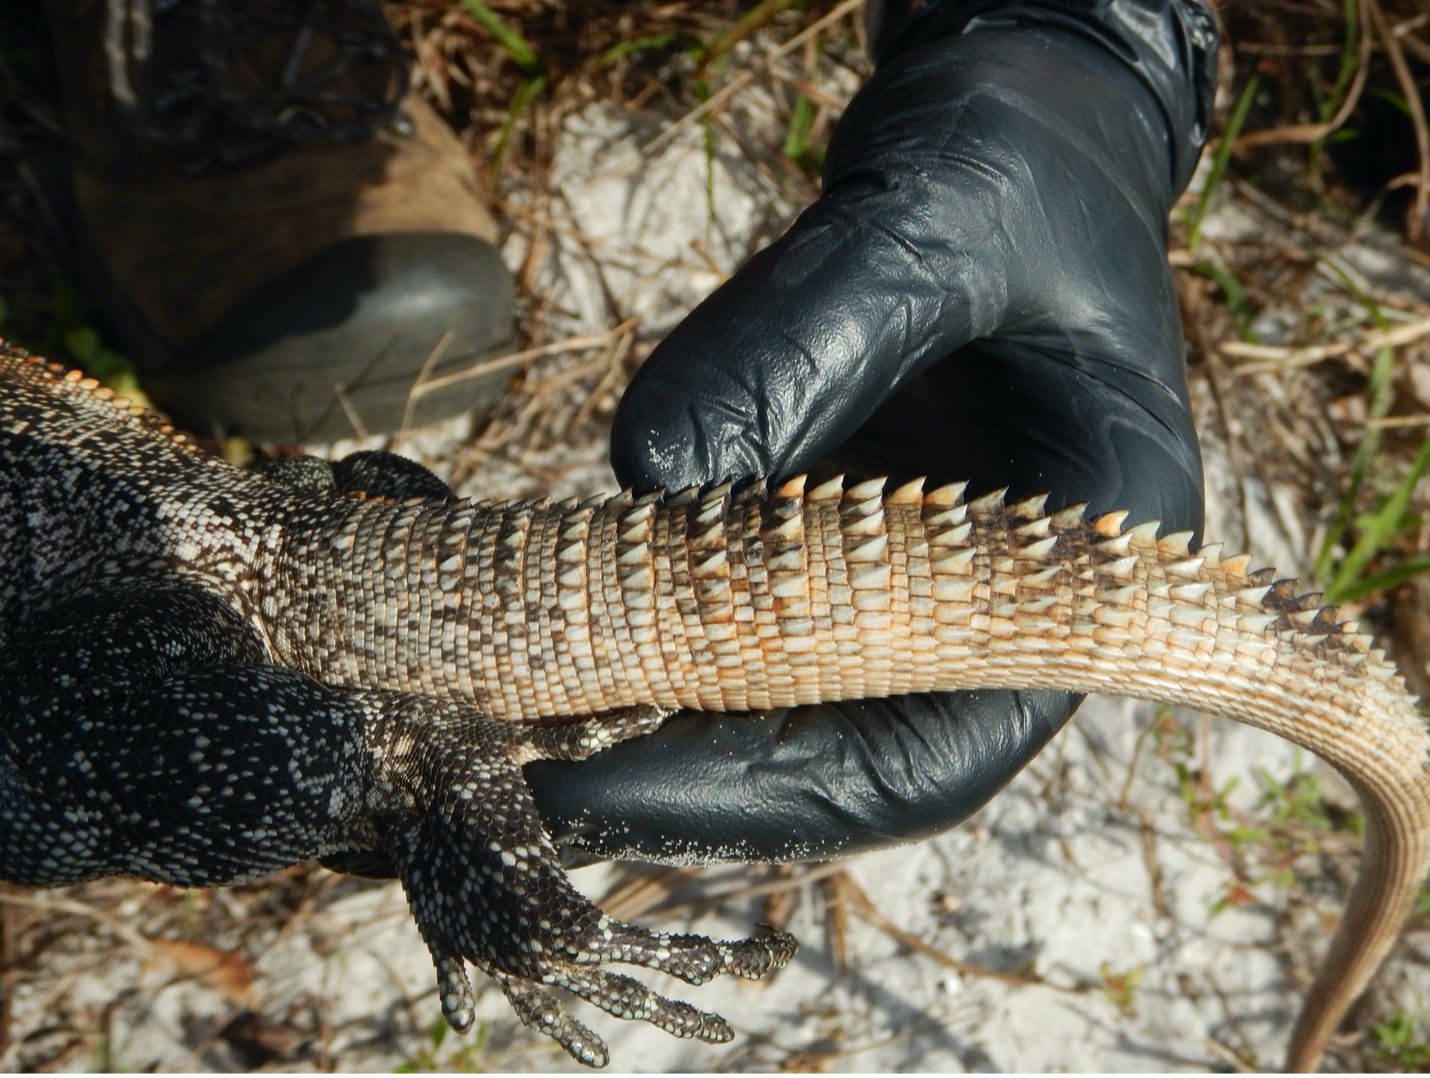 Green iguanas (Iguana iguana) have relatively smooth tails, but as their name indicates, spiny-tailed iguanas have rings of pointed scales on their tails, as shown in this image. 